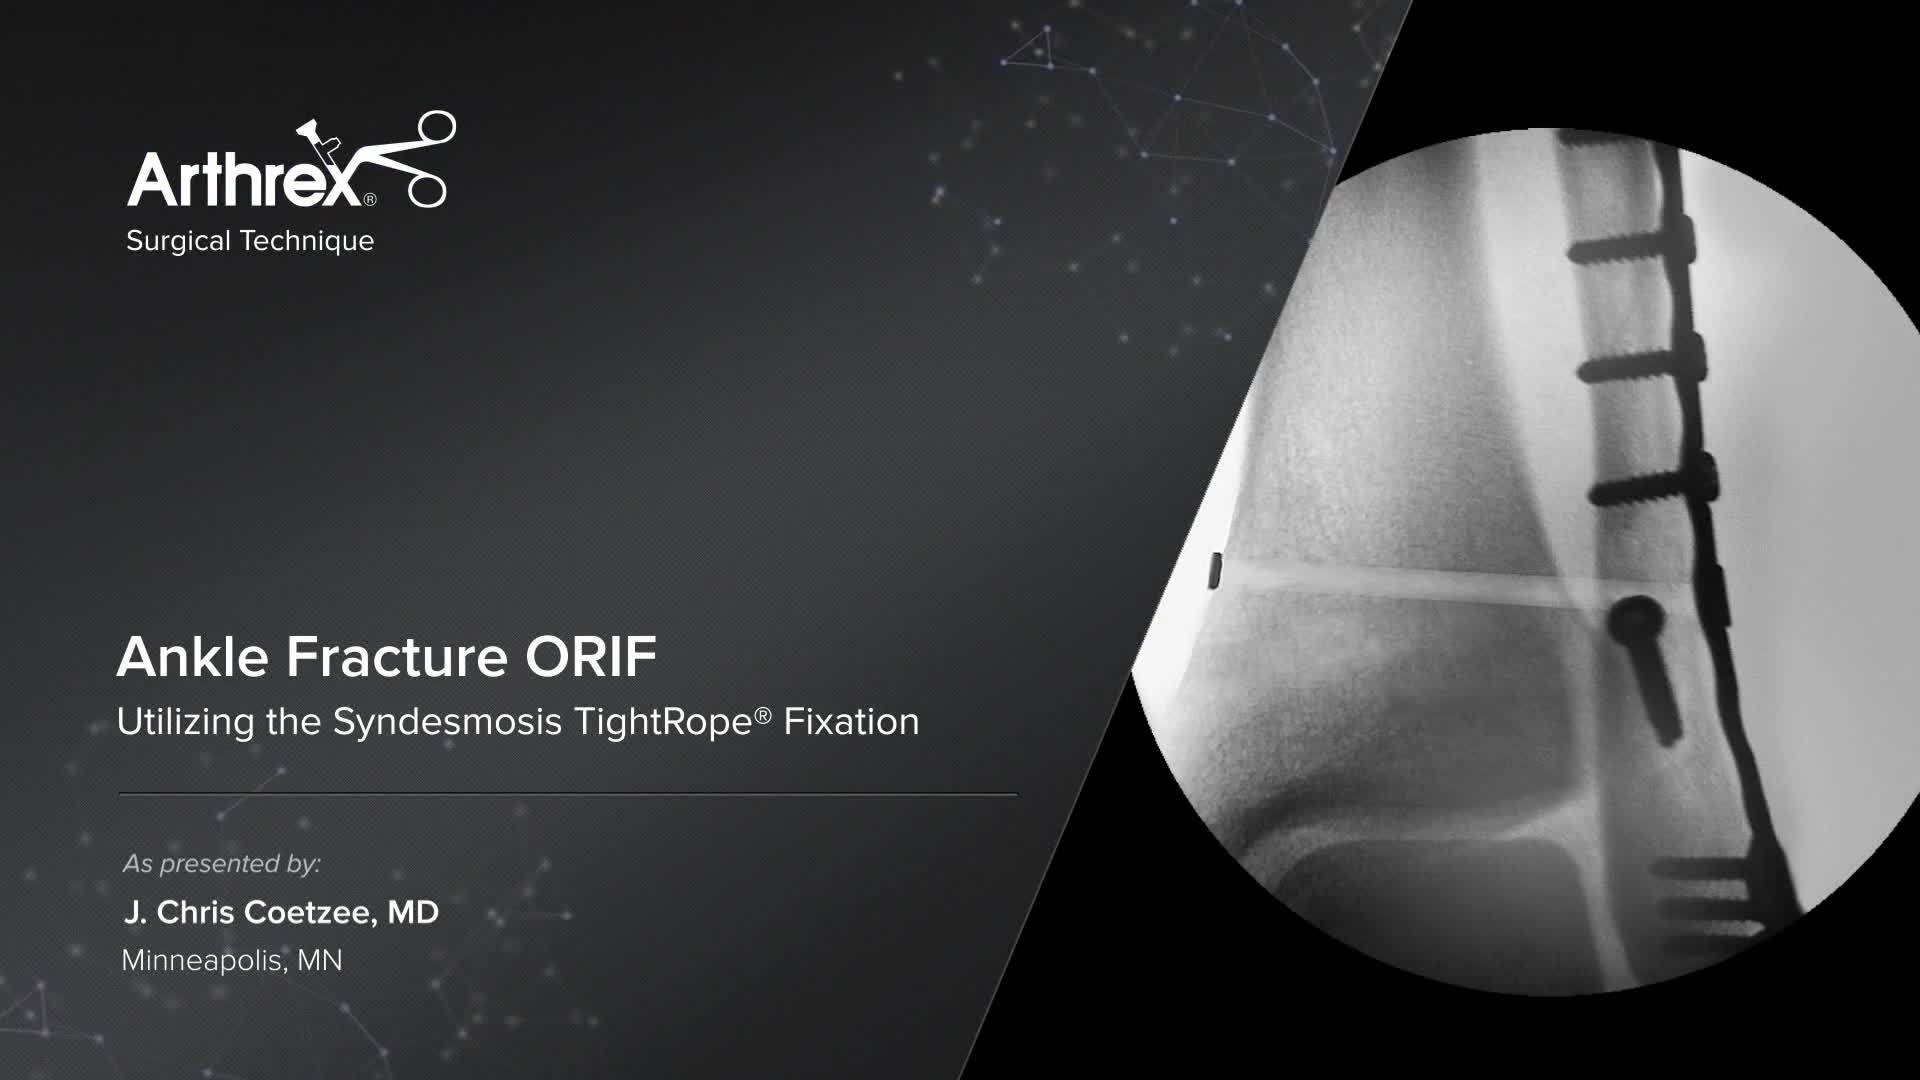 Arthrex - Ankle Fracture ORIF Utilizing the Syndesmosis TightRope® Fixation